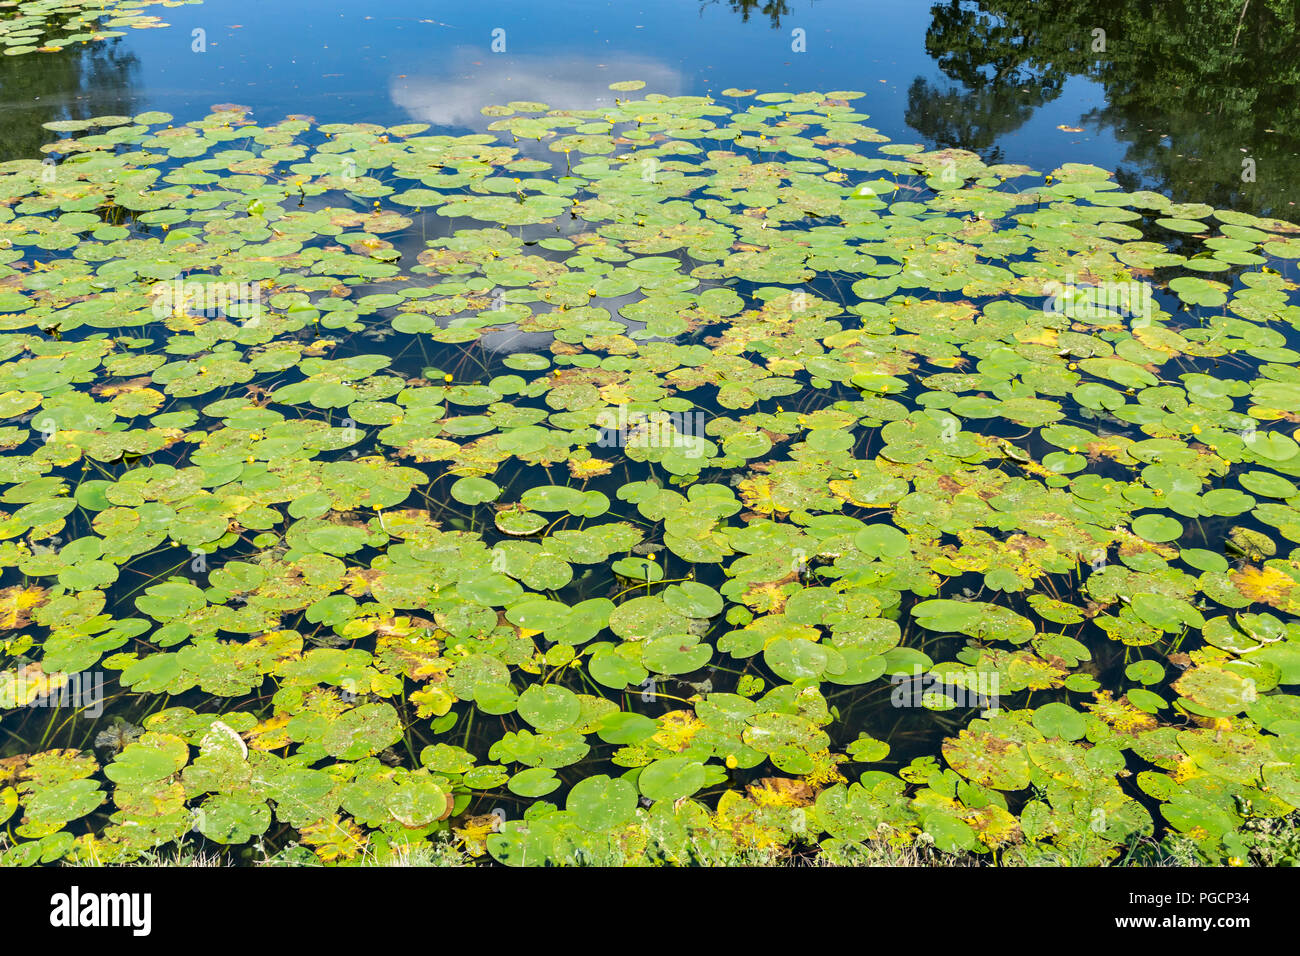 Berlin, Germany, July 25, 2018: Close-Up of a Carpet of Water Lilies Floating on Spandau Citadel Canal Stock Photo